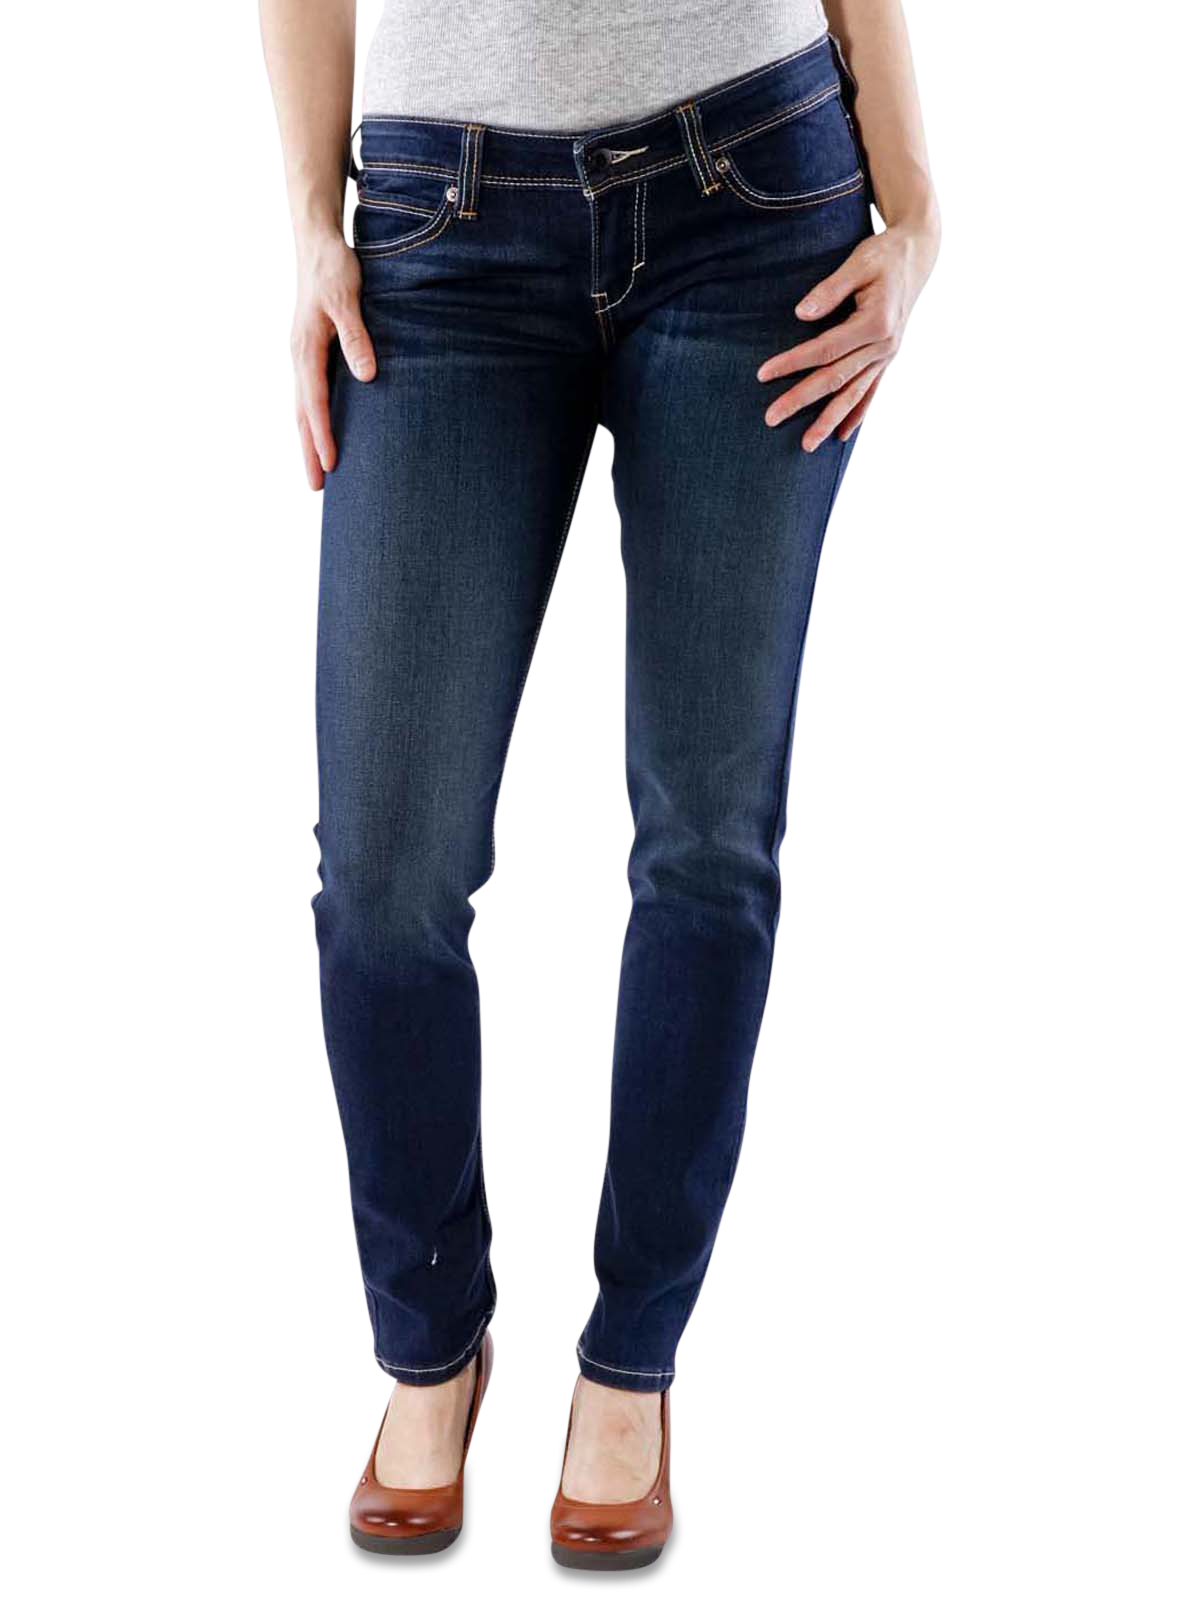 Jeans Download Png PNG Image